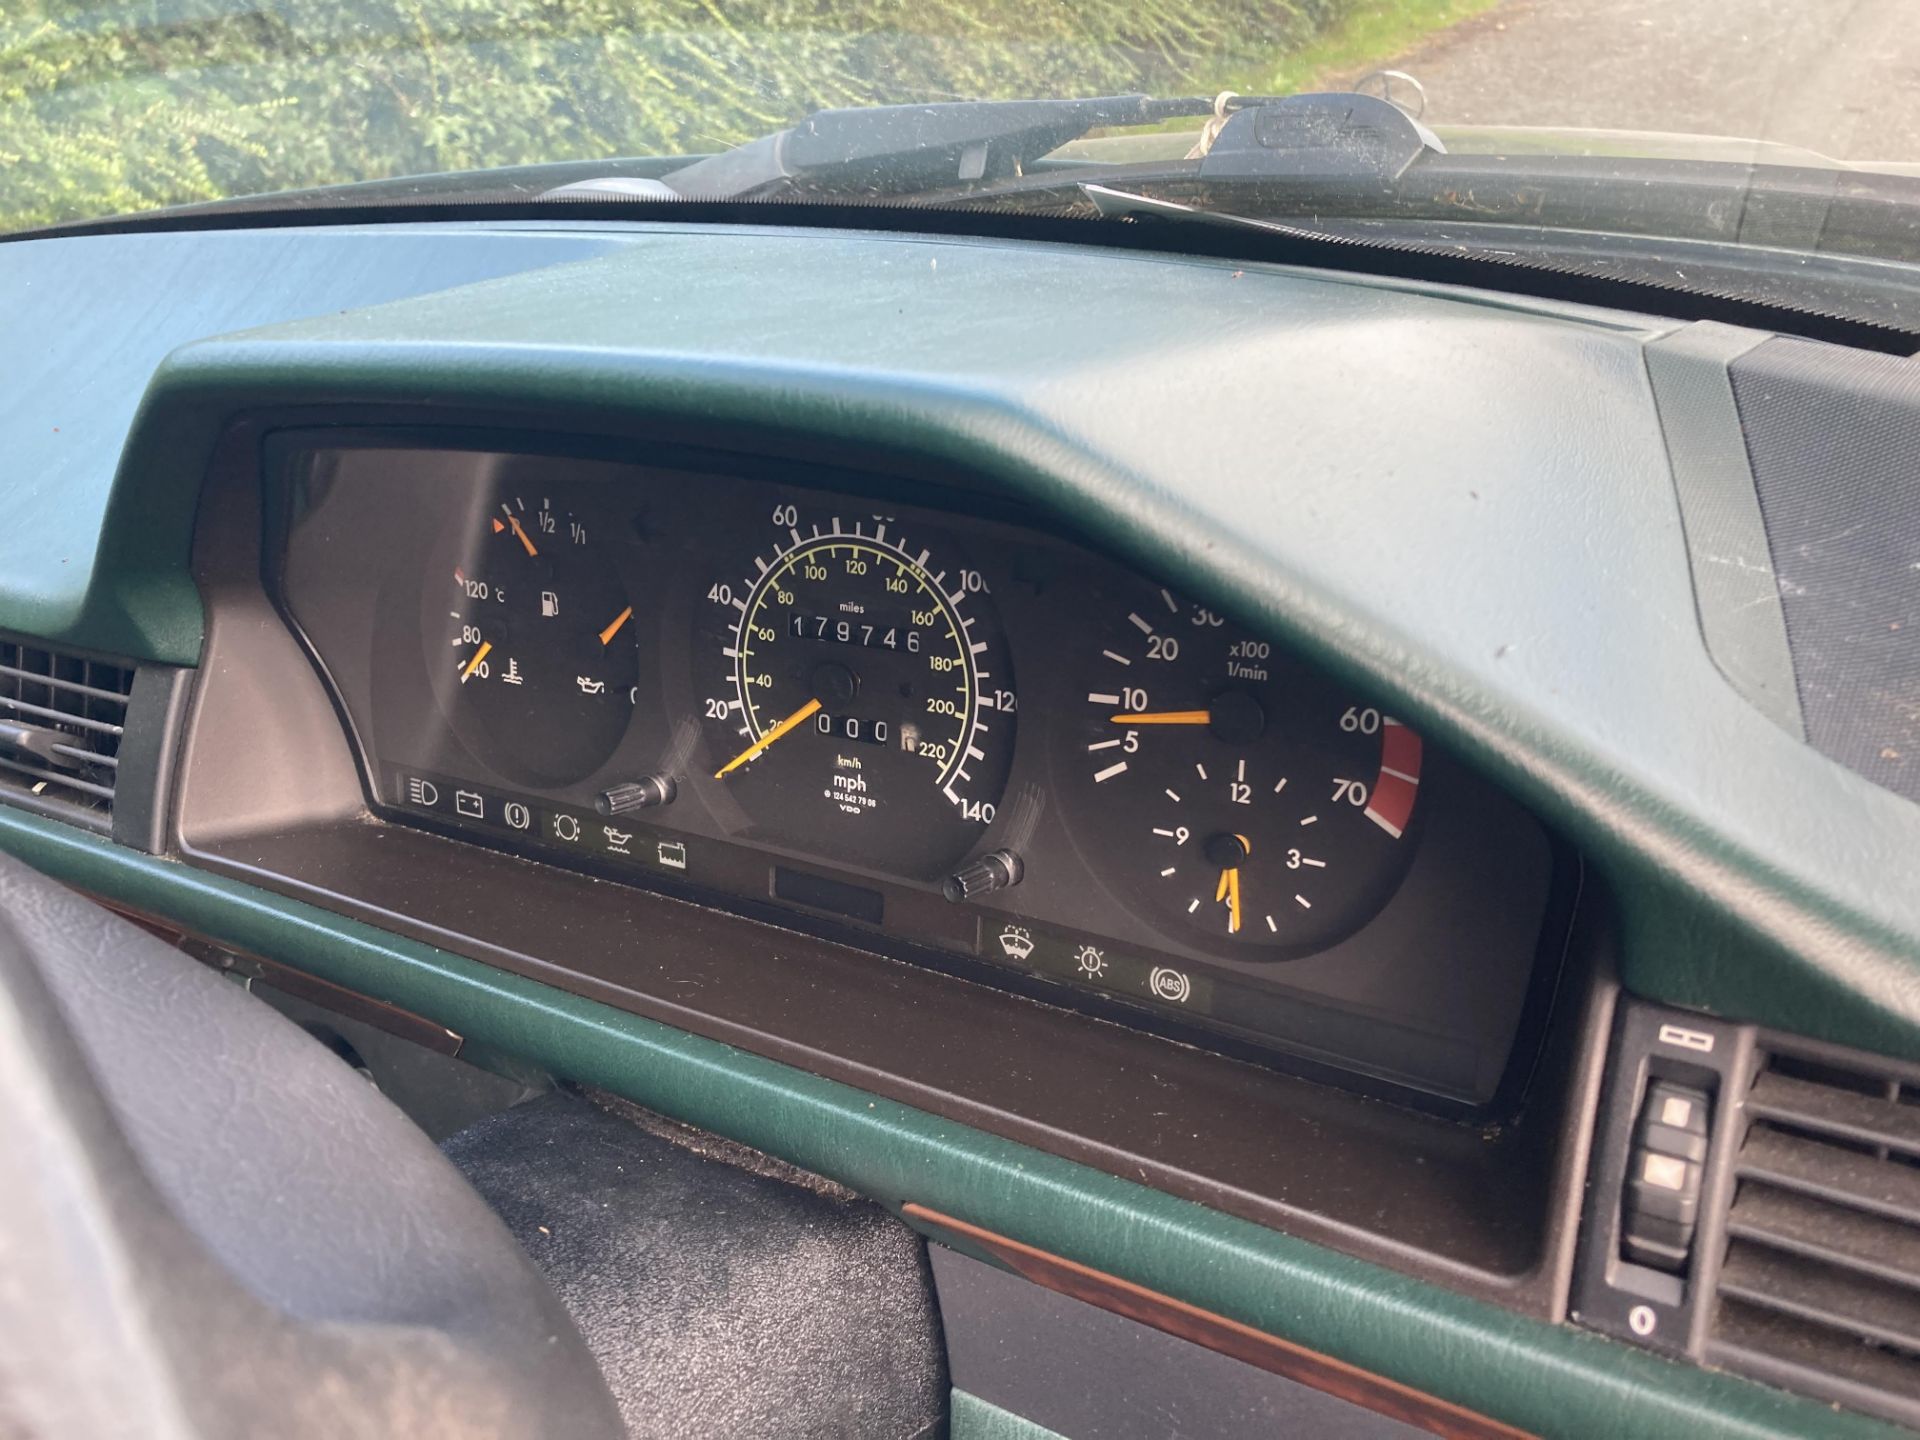 1992 MERCEDES 230E CLASSIC COUPE LOW RESERVE .LOCATION NORTHERN IRELAND. - Image 3 of 6